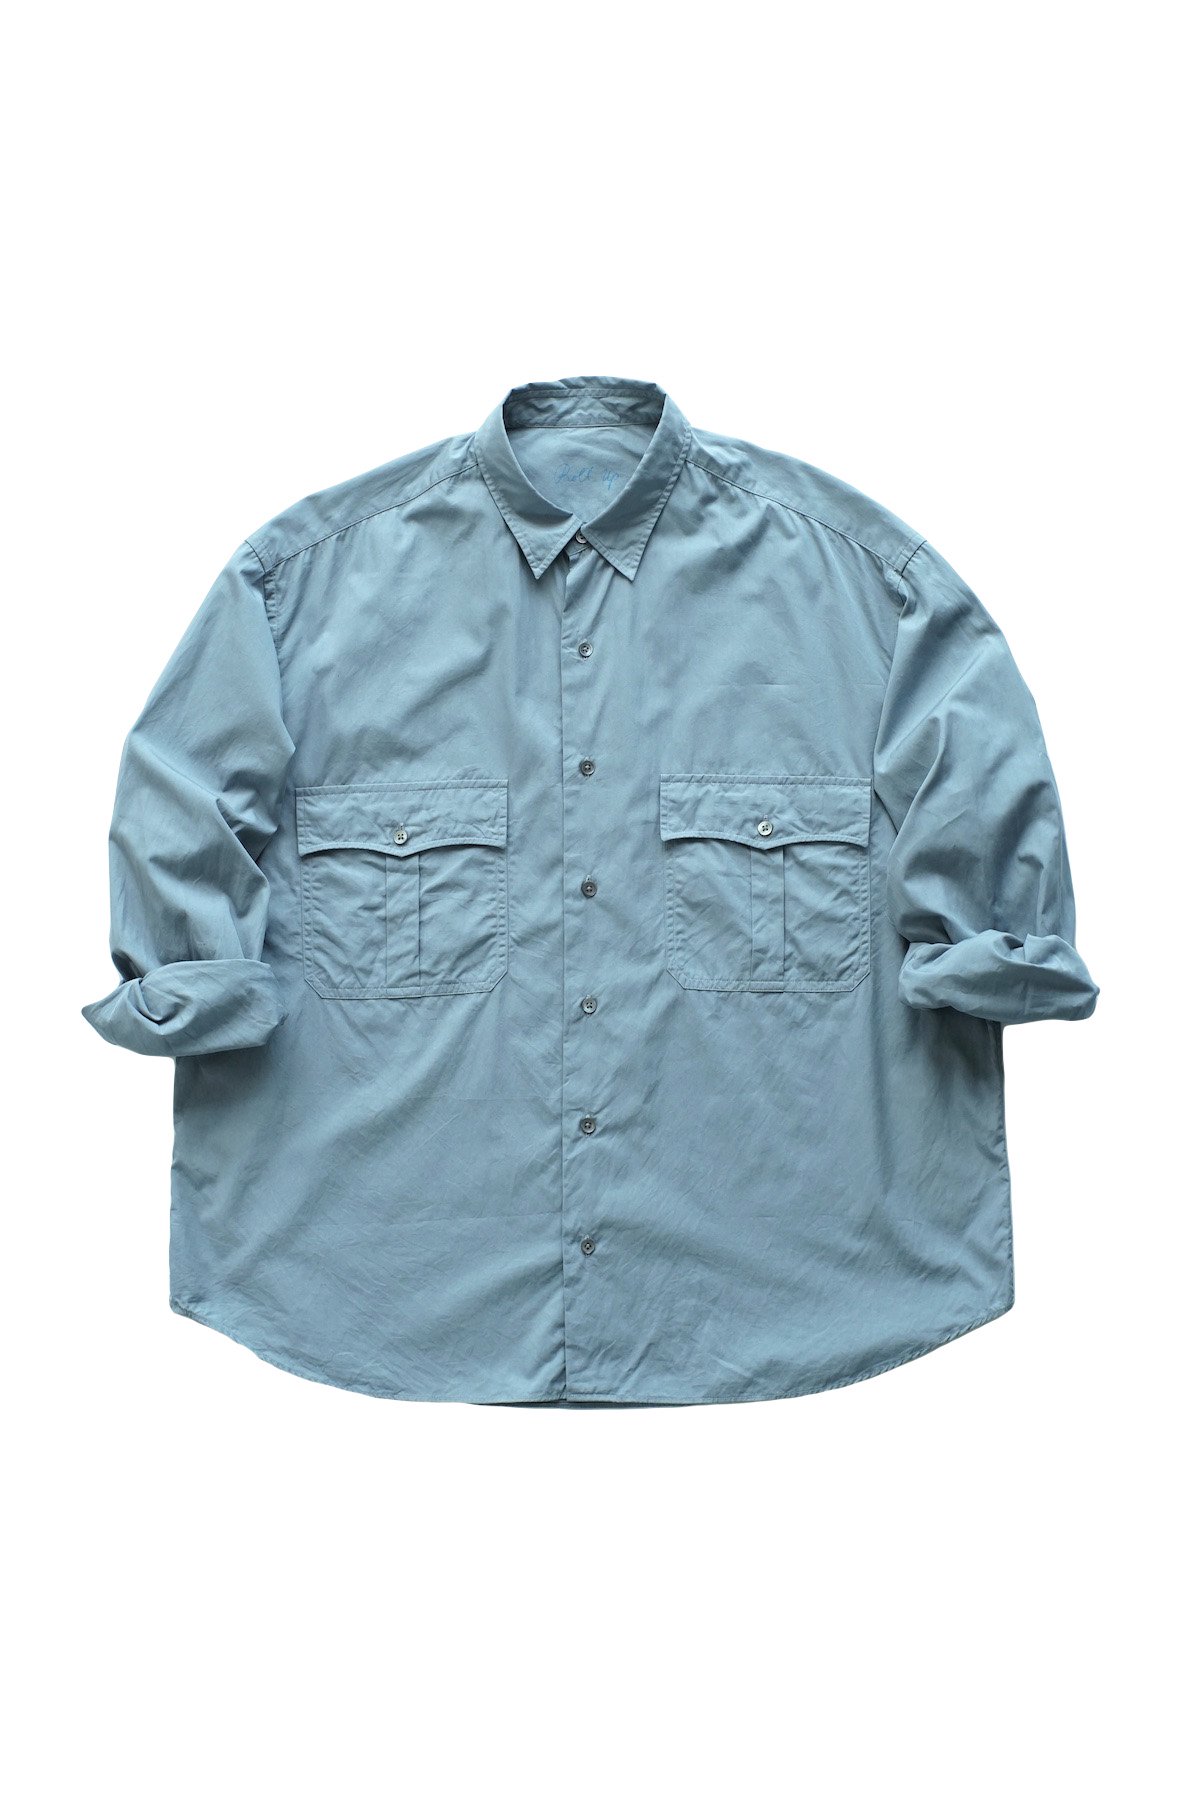 Porter Classic ポータークラシック 通販 正規店 フェートン - Phaeton Smart Clothes Online Store